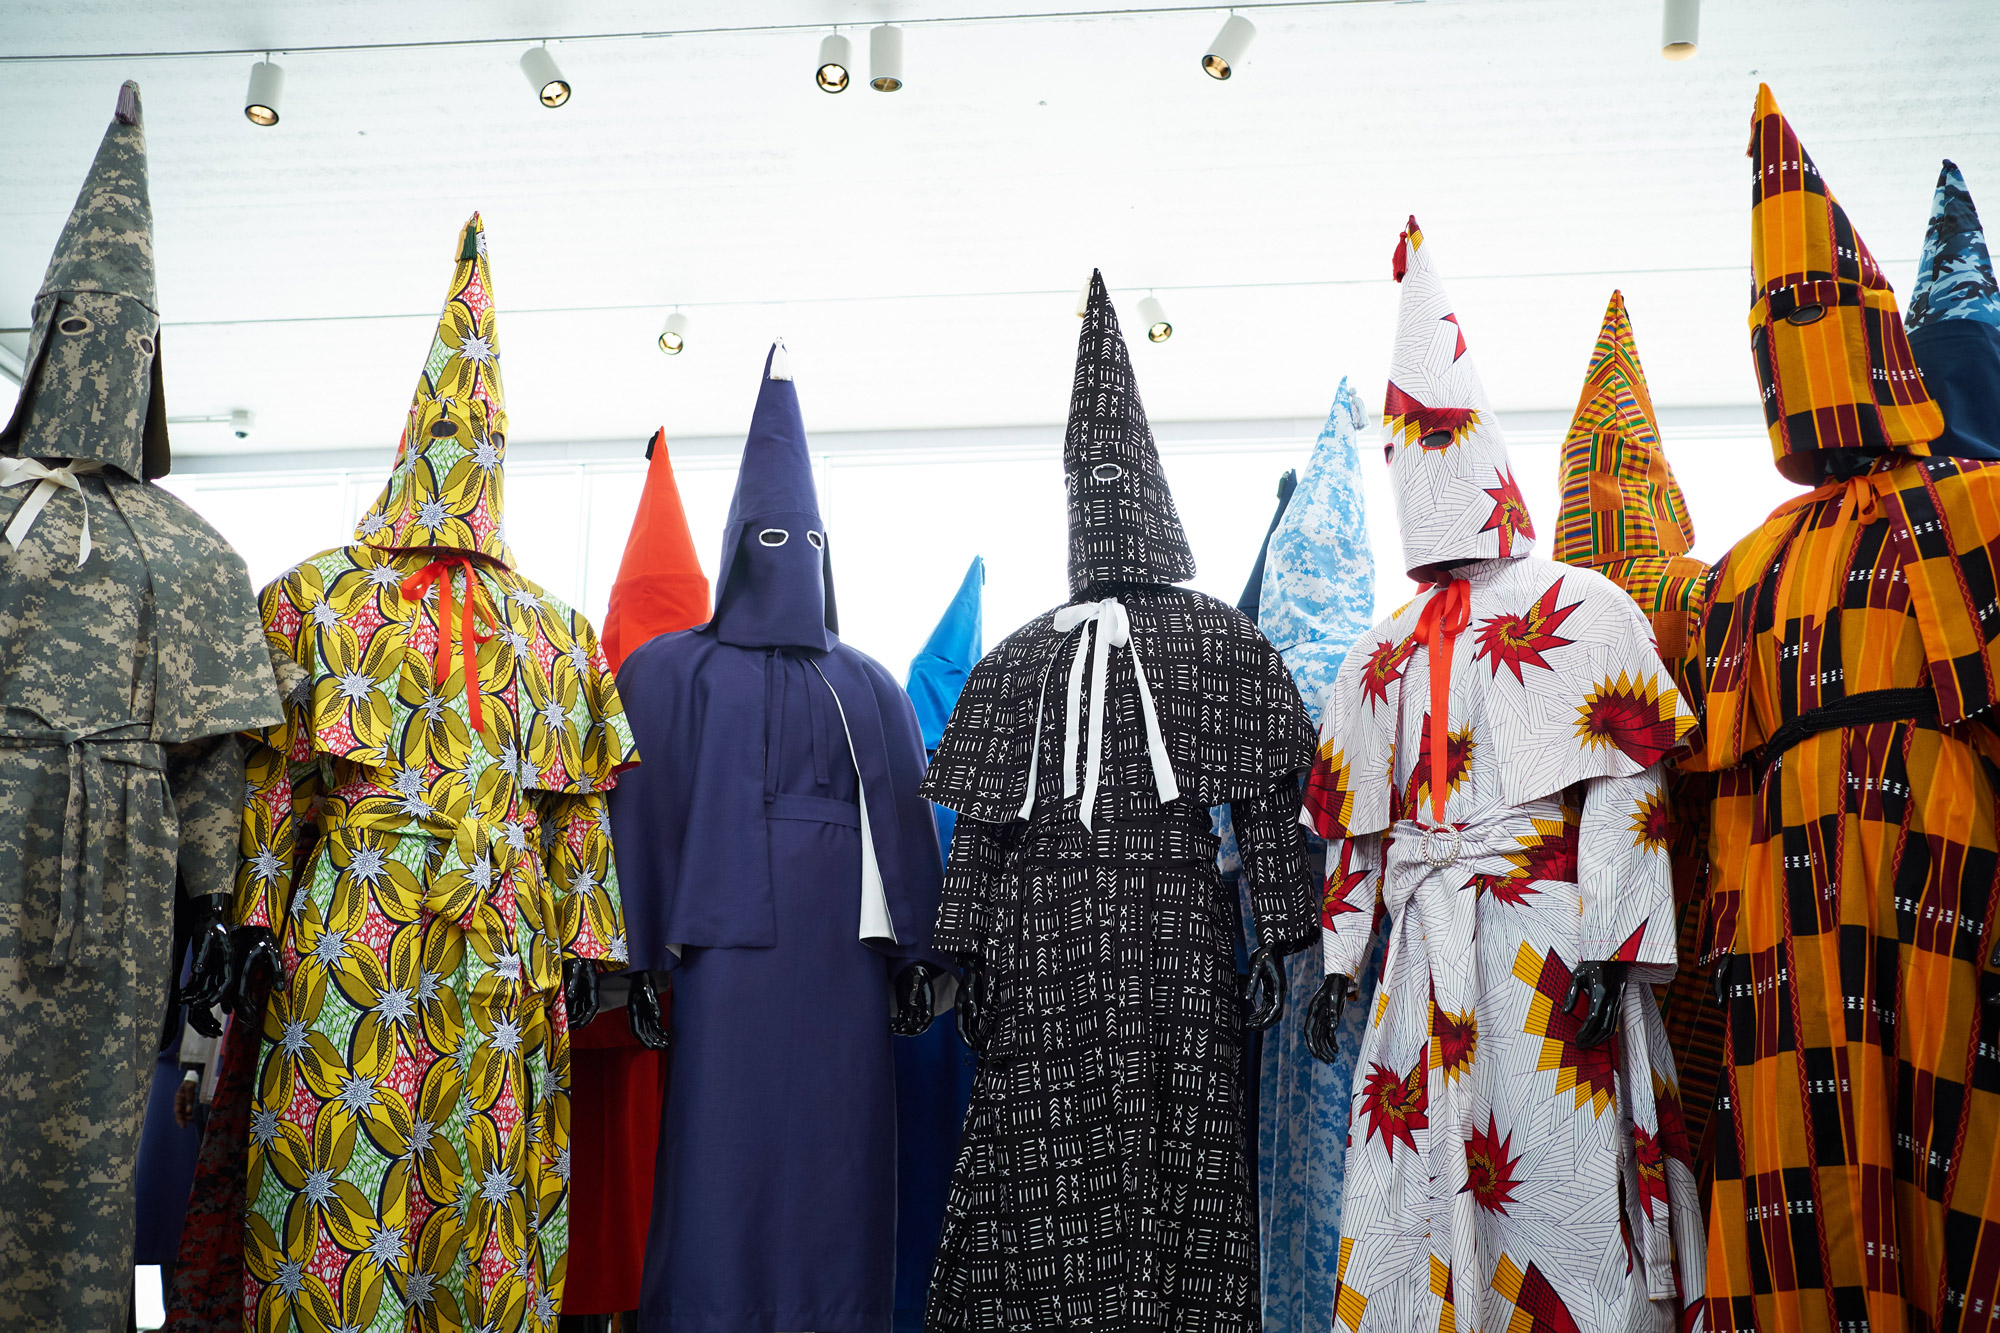 An artist's slavery relics and reimagined KKK robes show us the